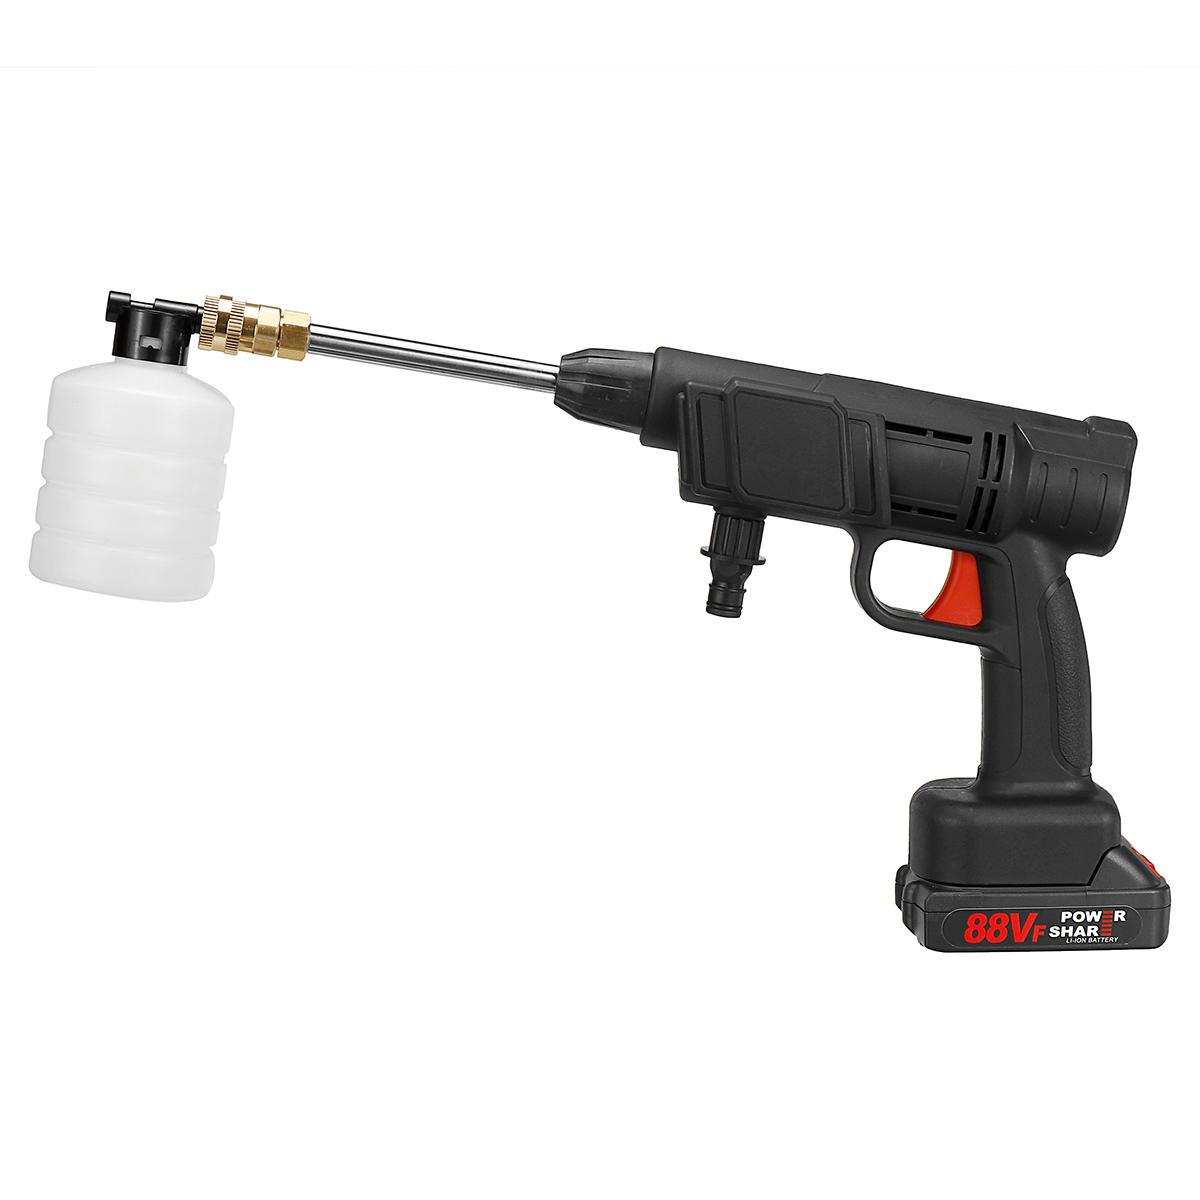 88VF-Cordless-High-Pressure-Washer-Car-Washing-Machine-Water-Spayer-Guns-Vehicle-Cleaning-Tool-W-Non-1867531-8